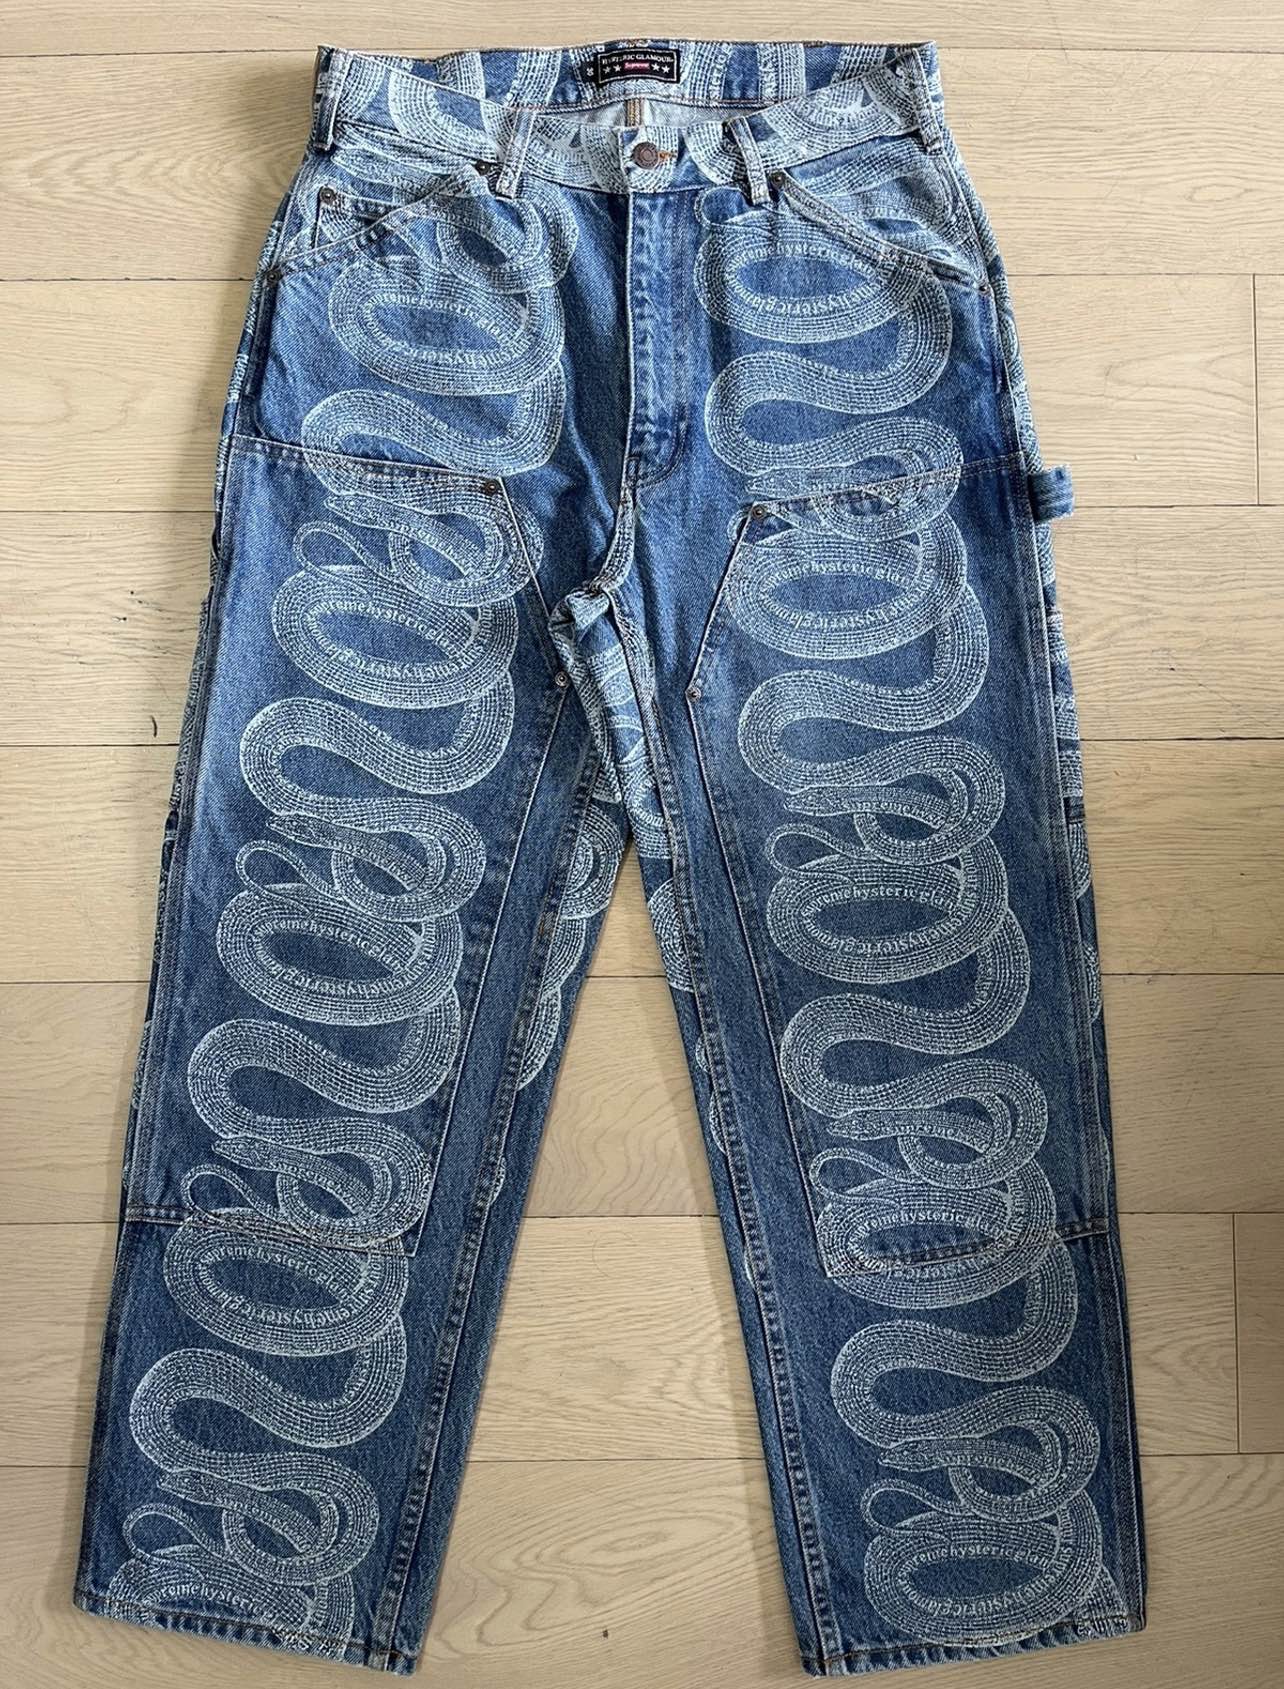 SUPREME x HYSTERIC GLAMOUR “ SNAKE PRINT DOUBLE KNEE WORKER DENIM PANTS